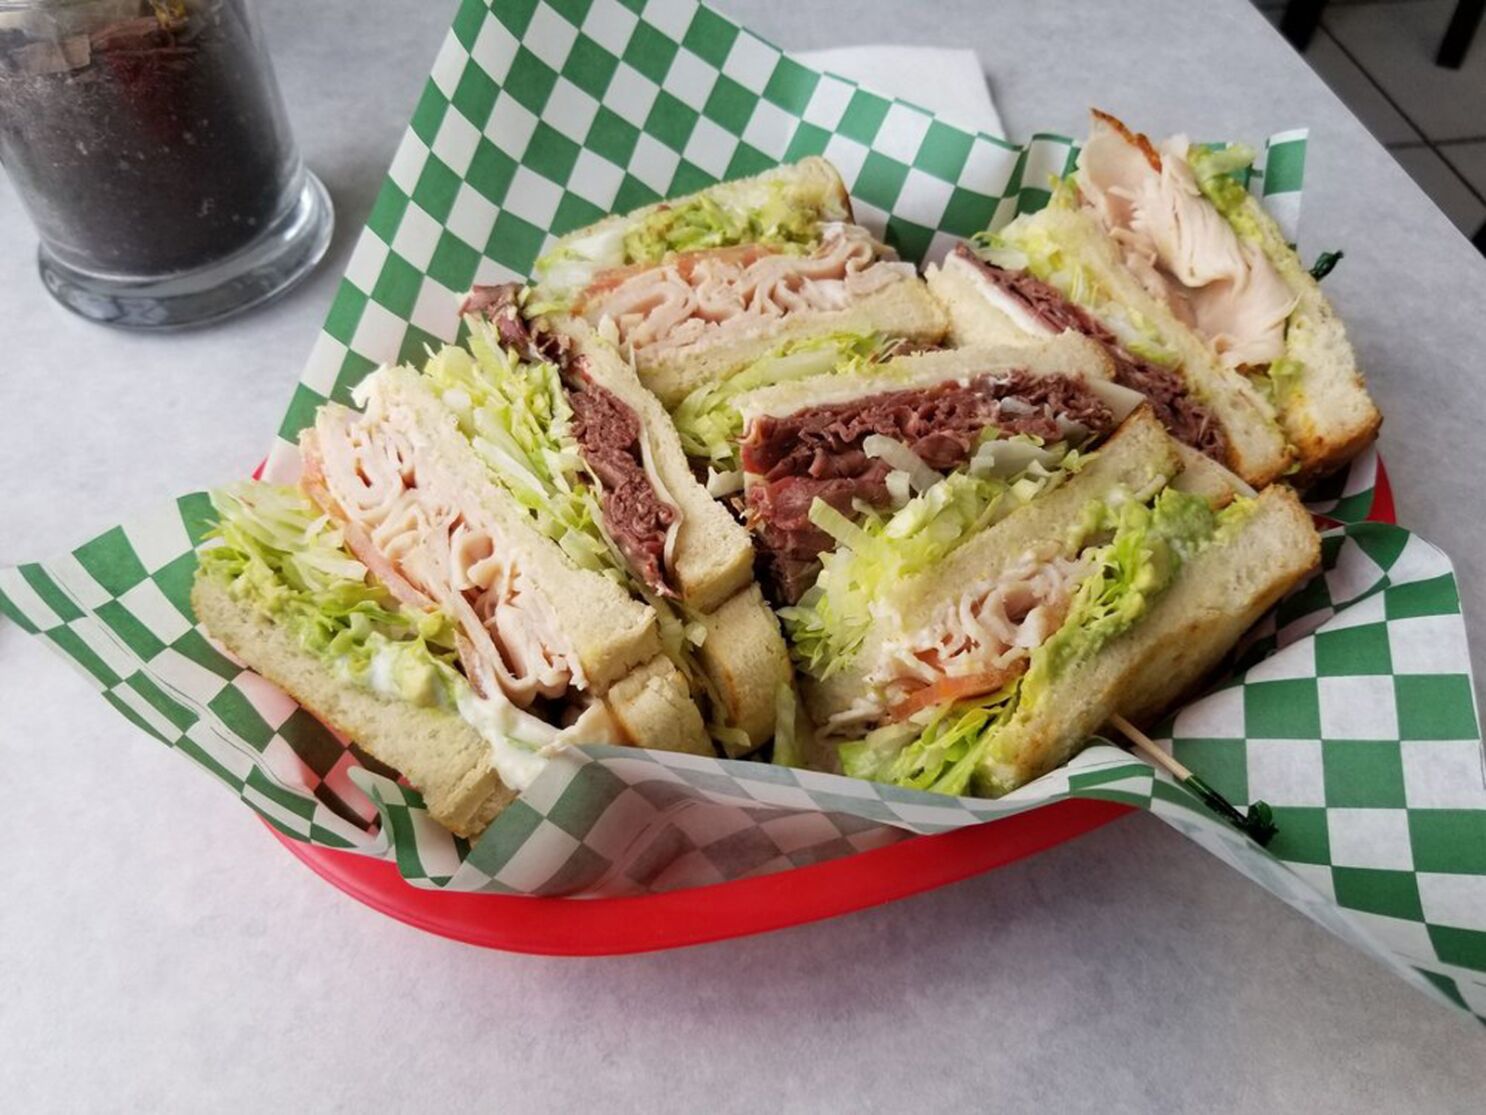 regel Fruitig Verwant Is this Otay Mesa sandwich shop among the top 5 places to eat in America?  Yelp says yes! - The San Diego Union-Tribune